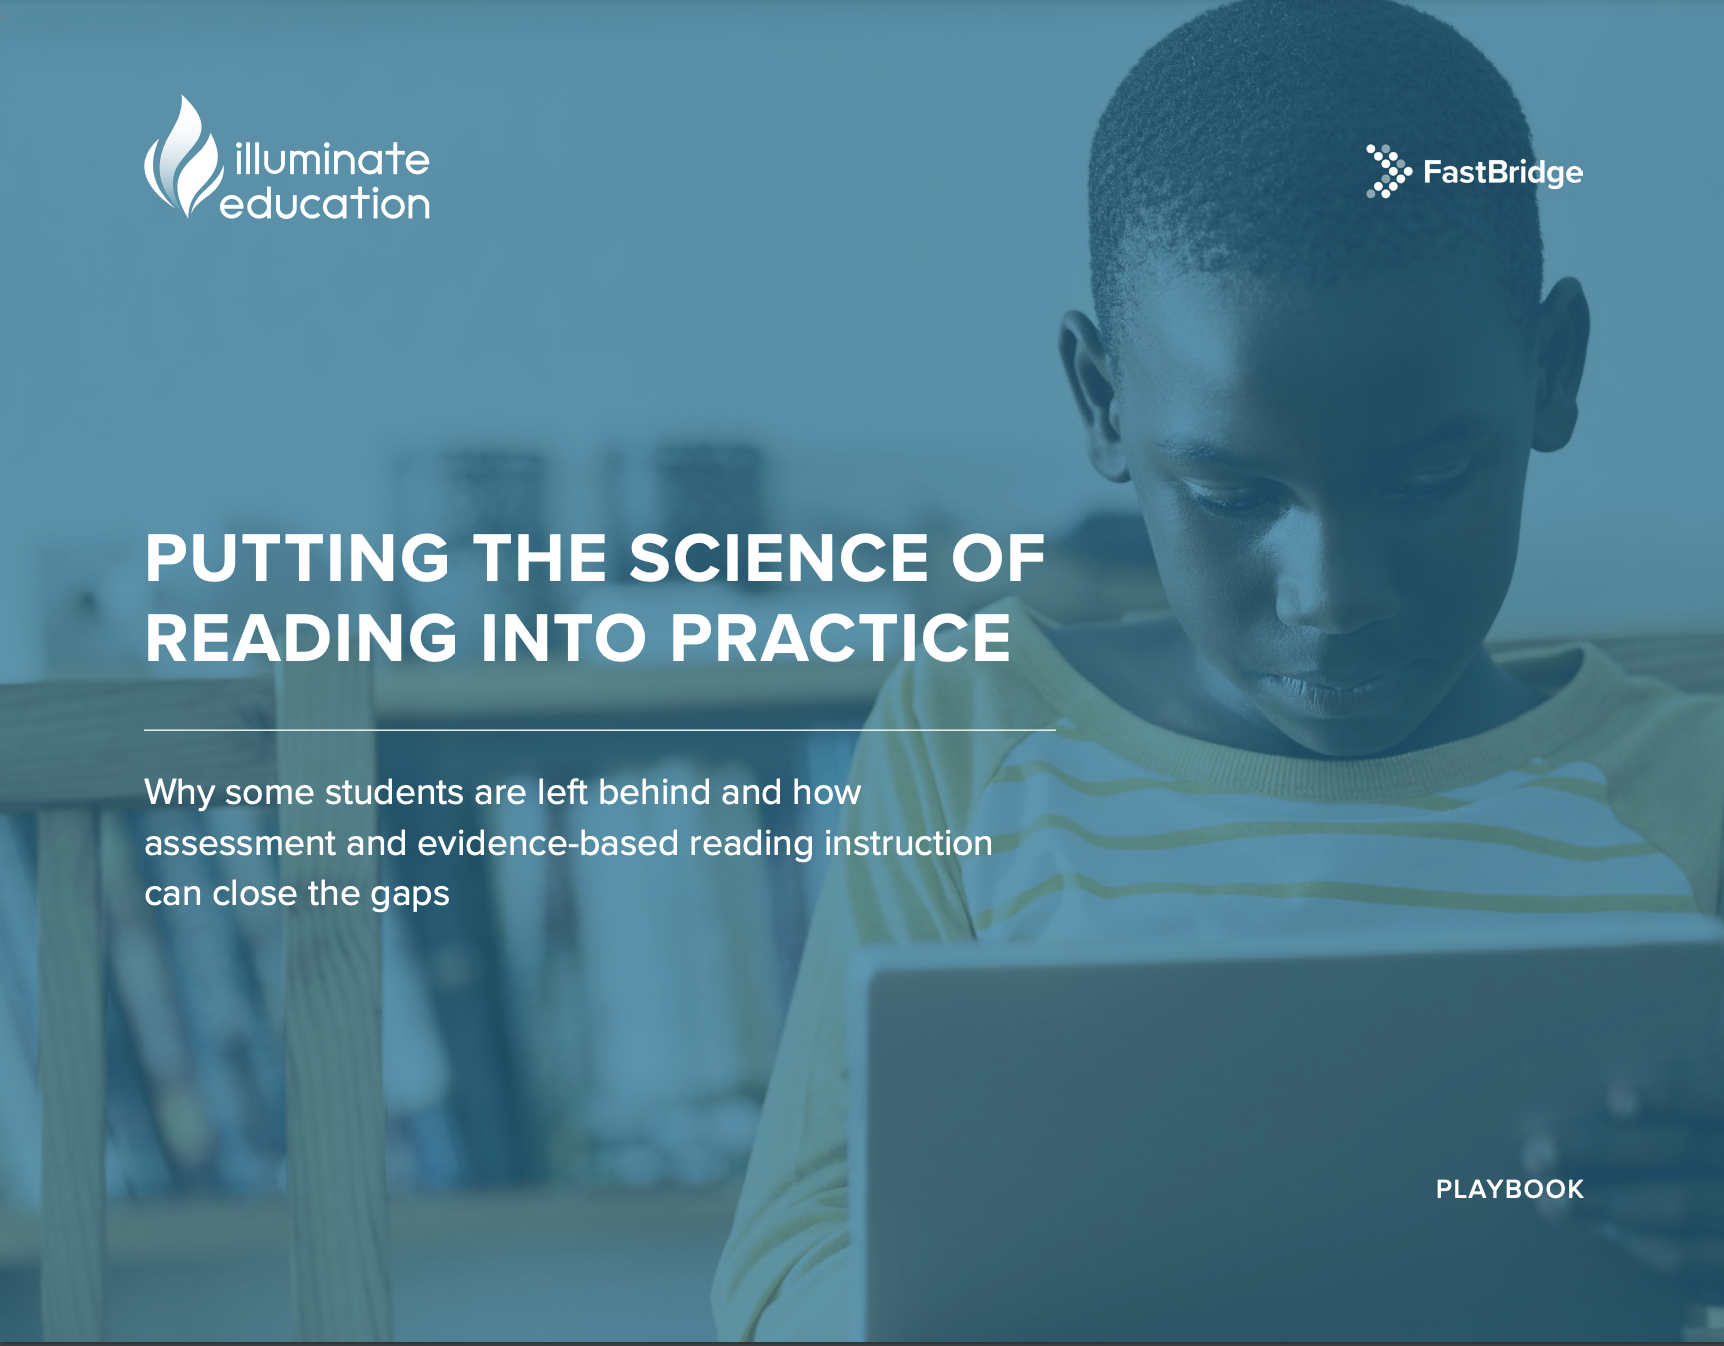 PUTTING THE SCIENCE OF READING INTO PRACTICE